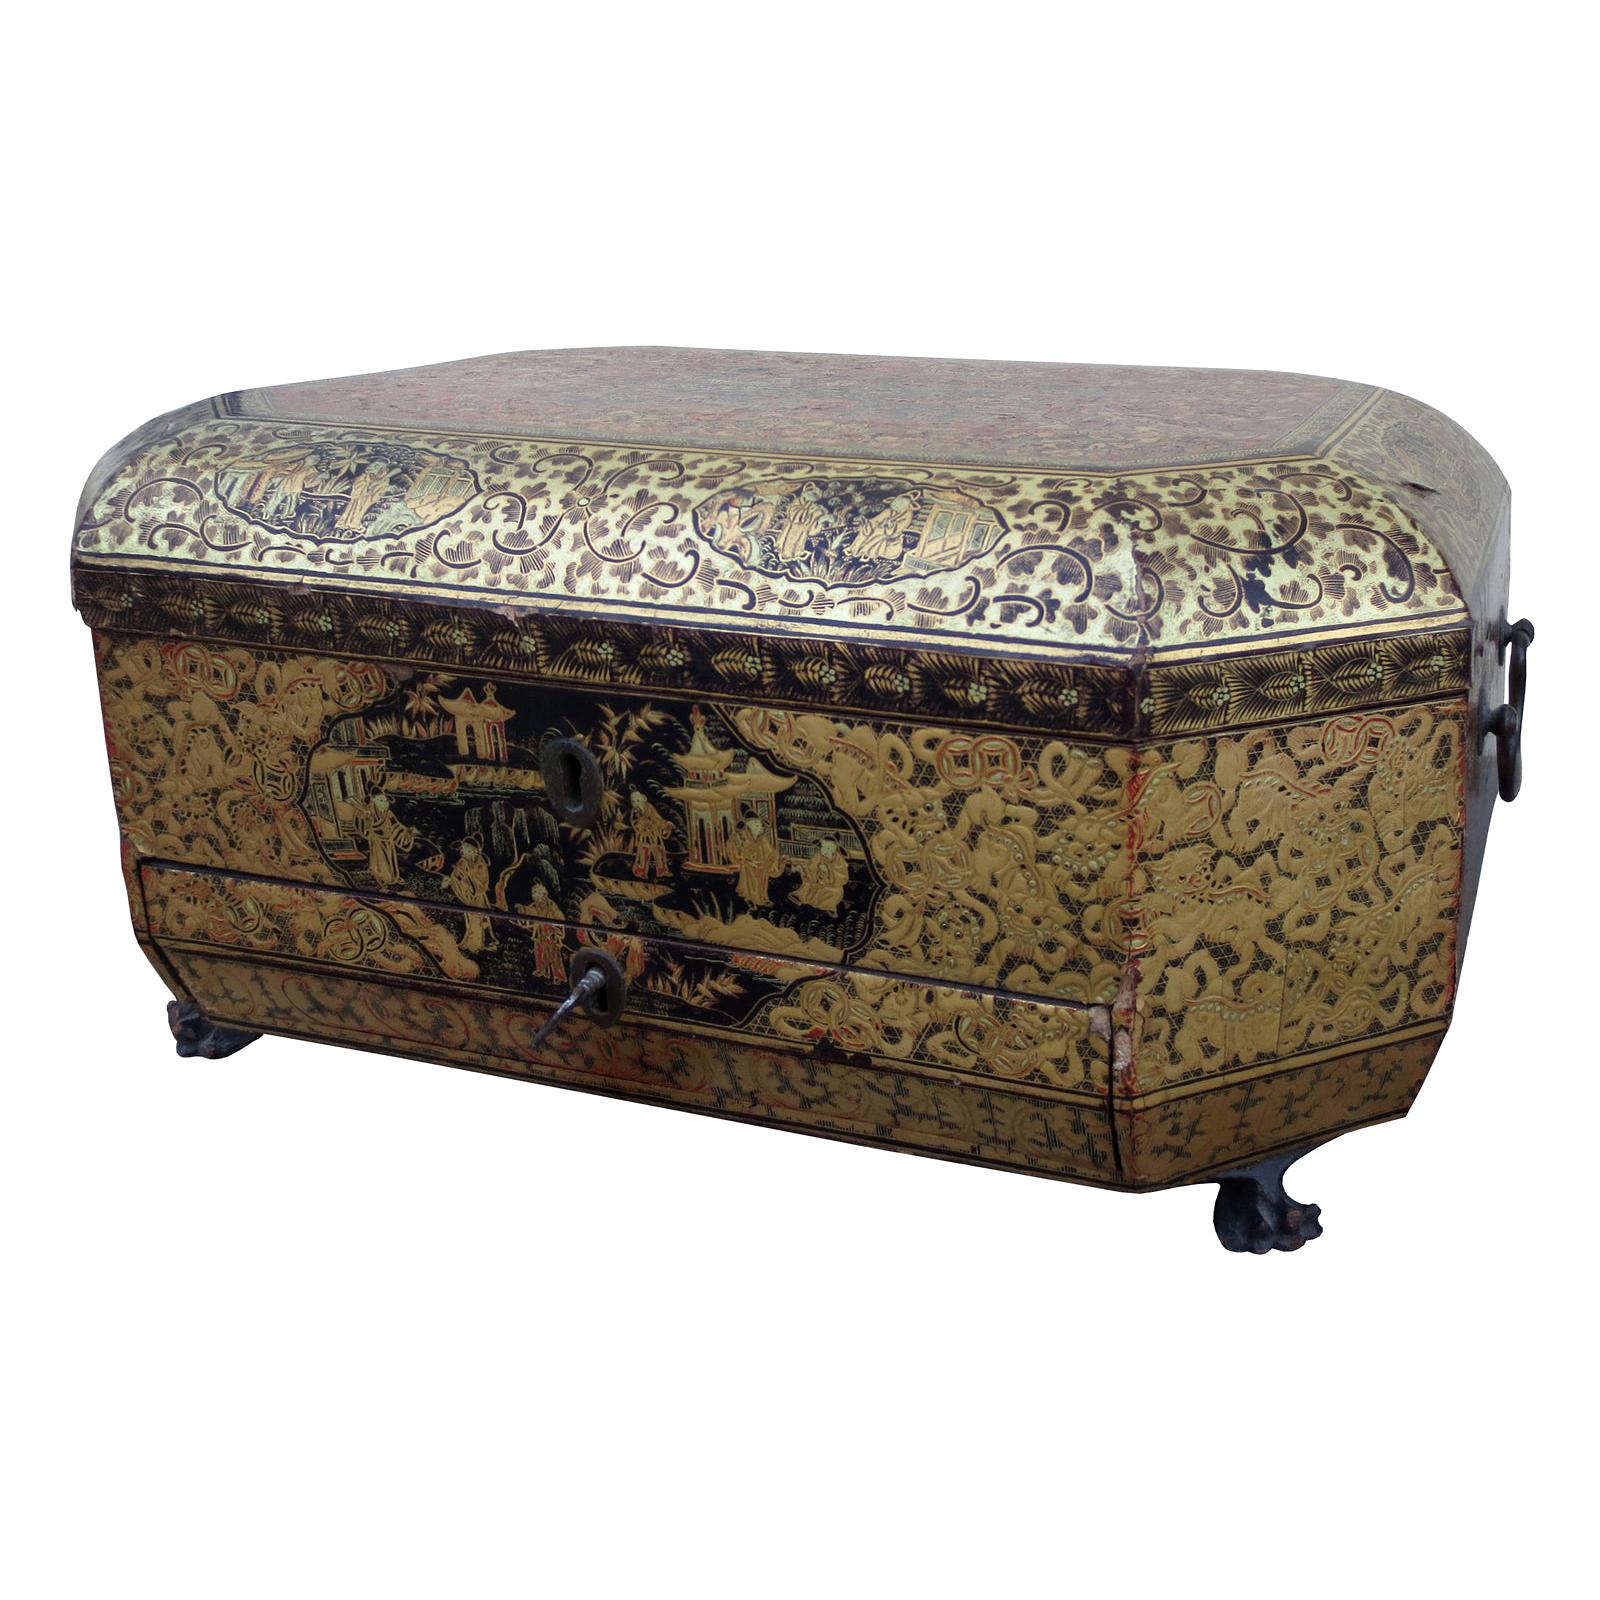 19th Century Chinoiserie Lacquer Box